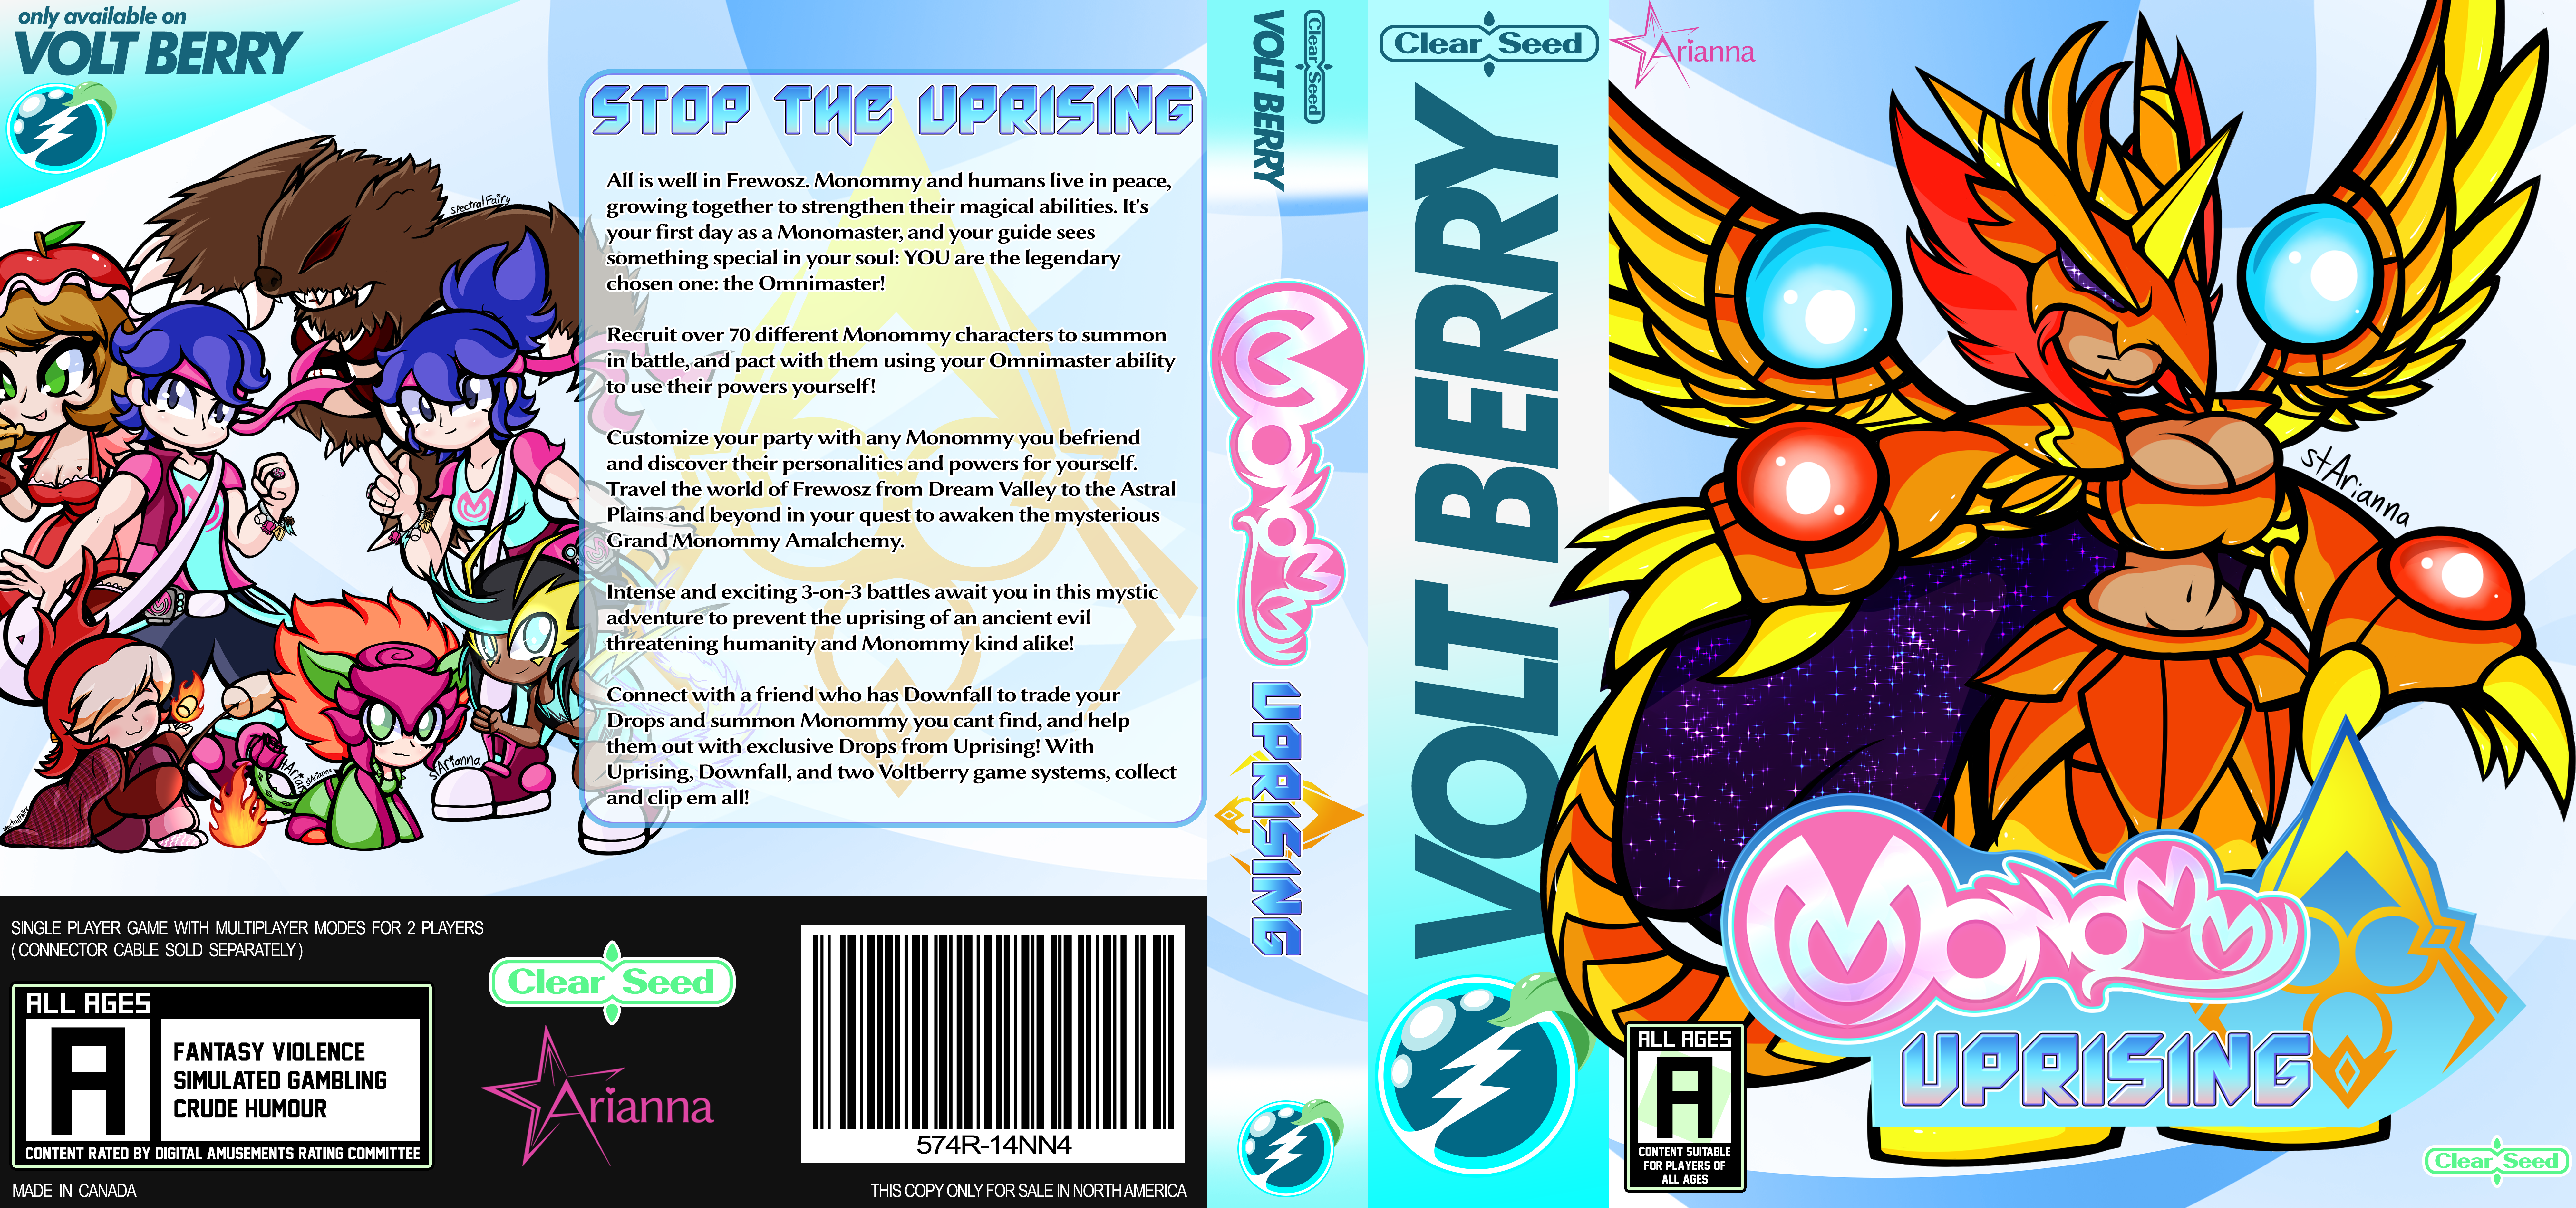 the full cover art for the Volt Berry game Monommy Uprising